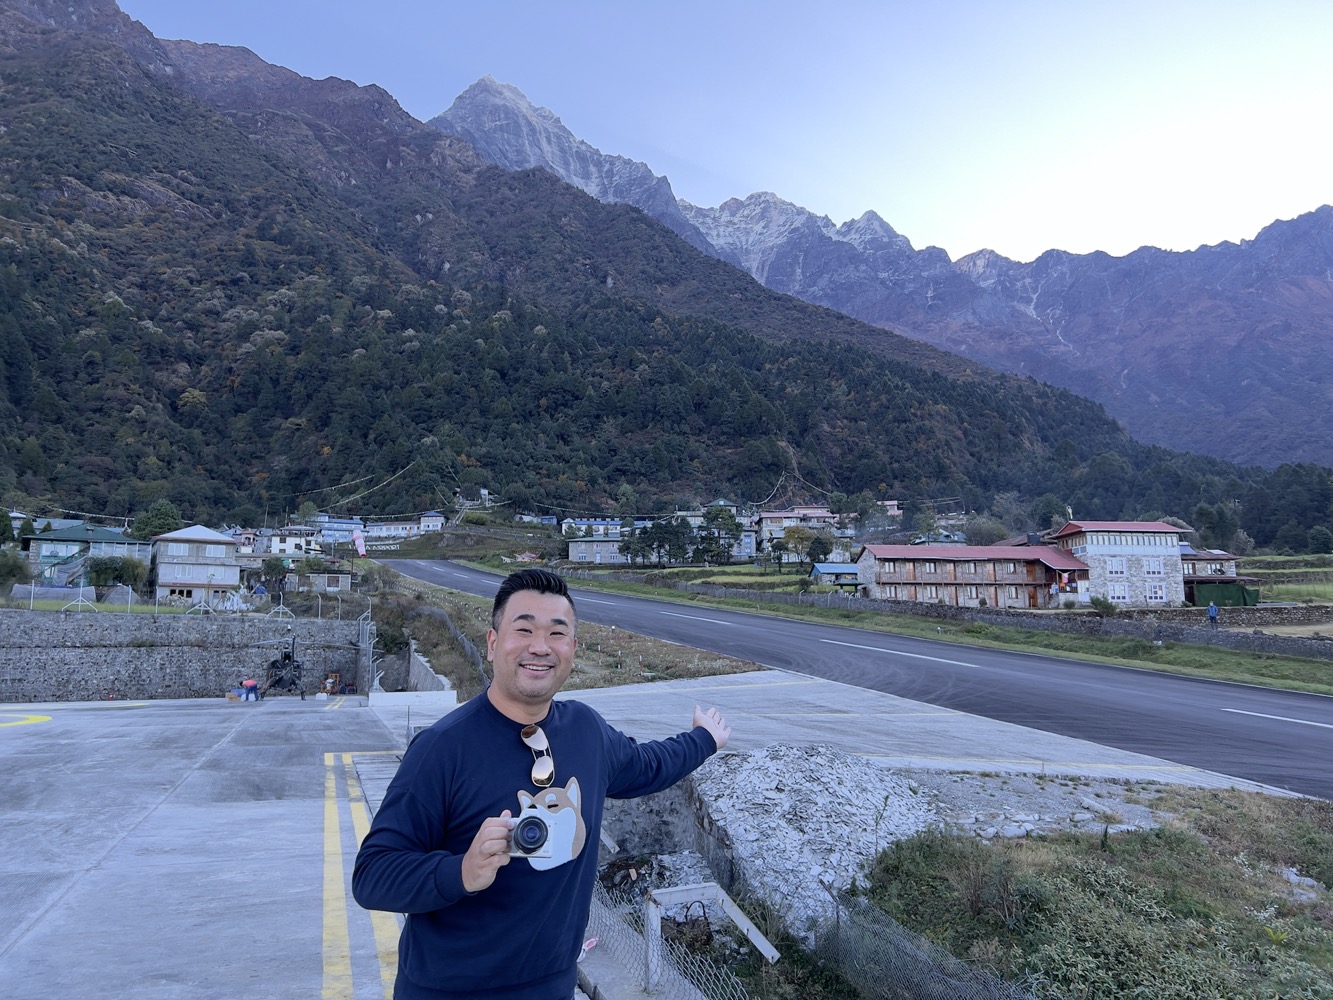 a man standing on a road with a camera in front of mountains